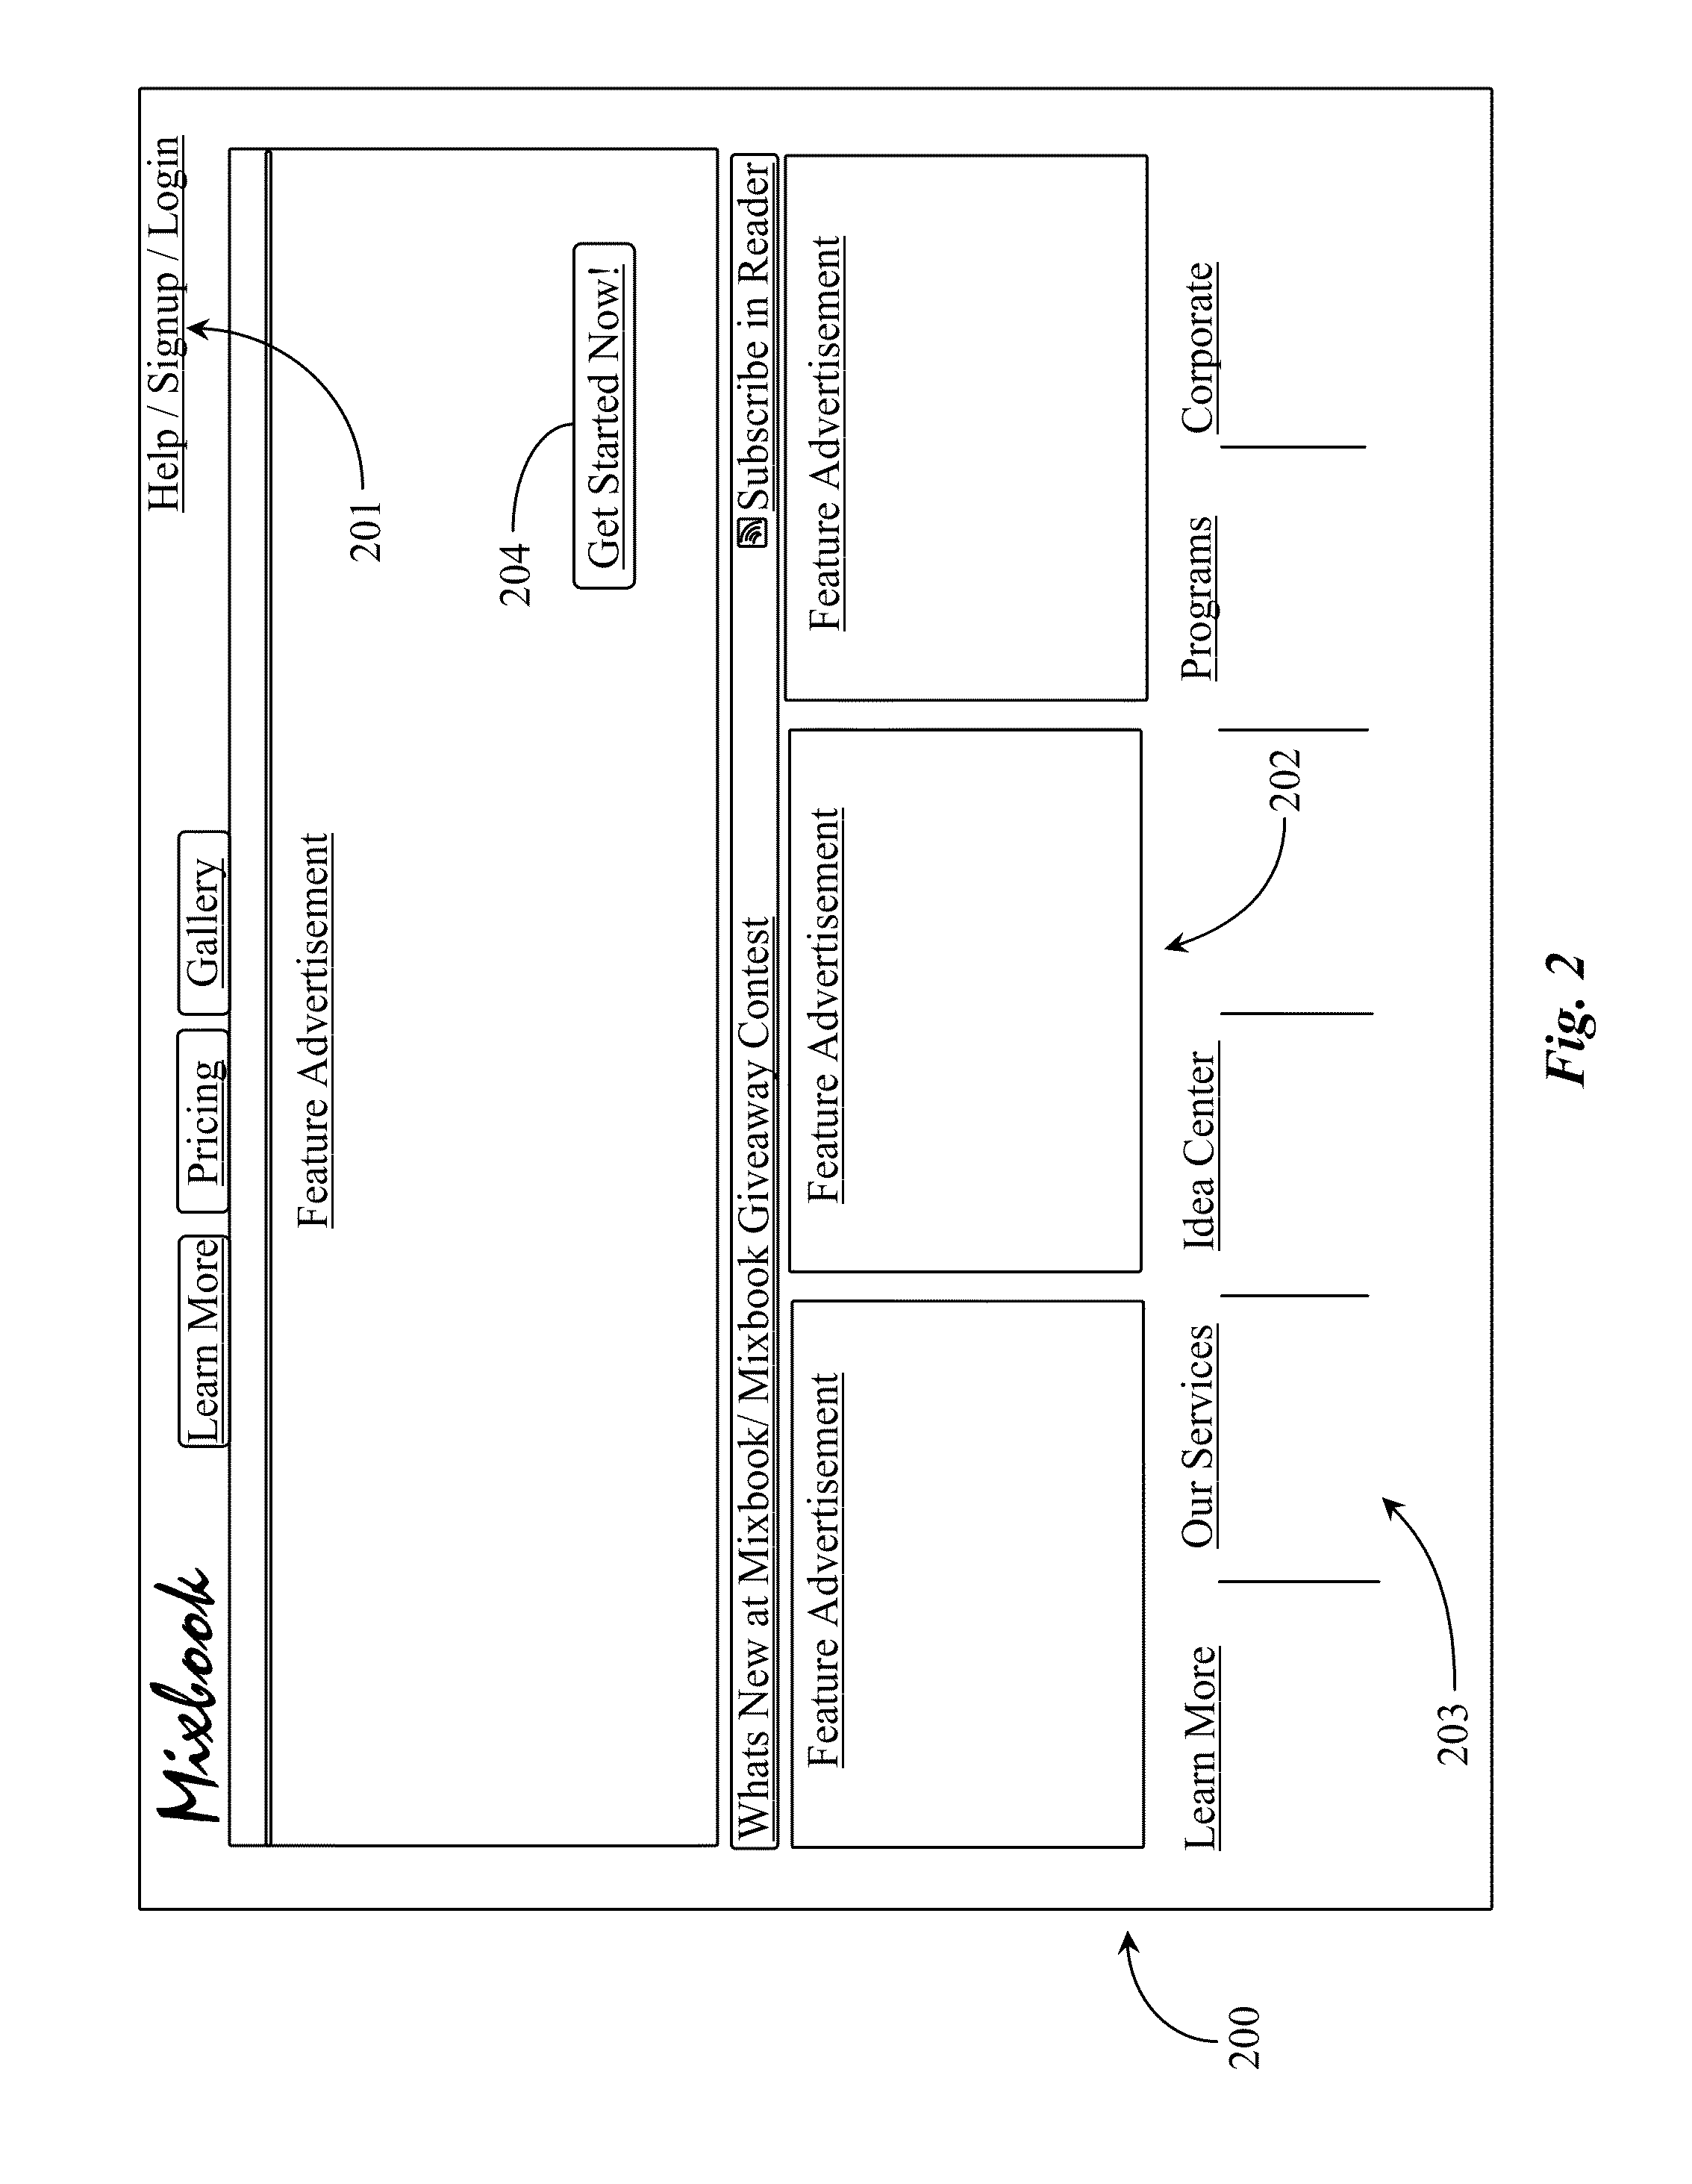 Method for Dynamic Bundling of Graphics Editing Tools presented to Clients engaged in Image-Based Project Creation through an Electronic Interface